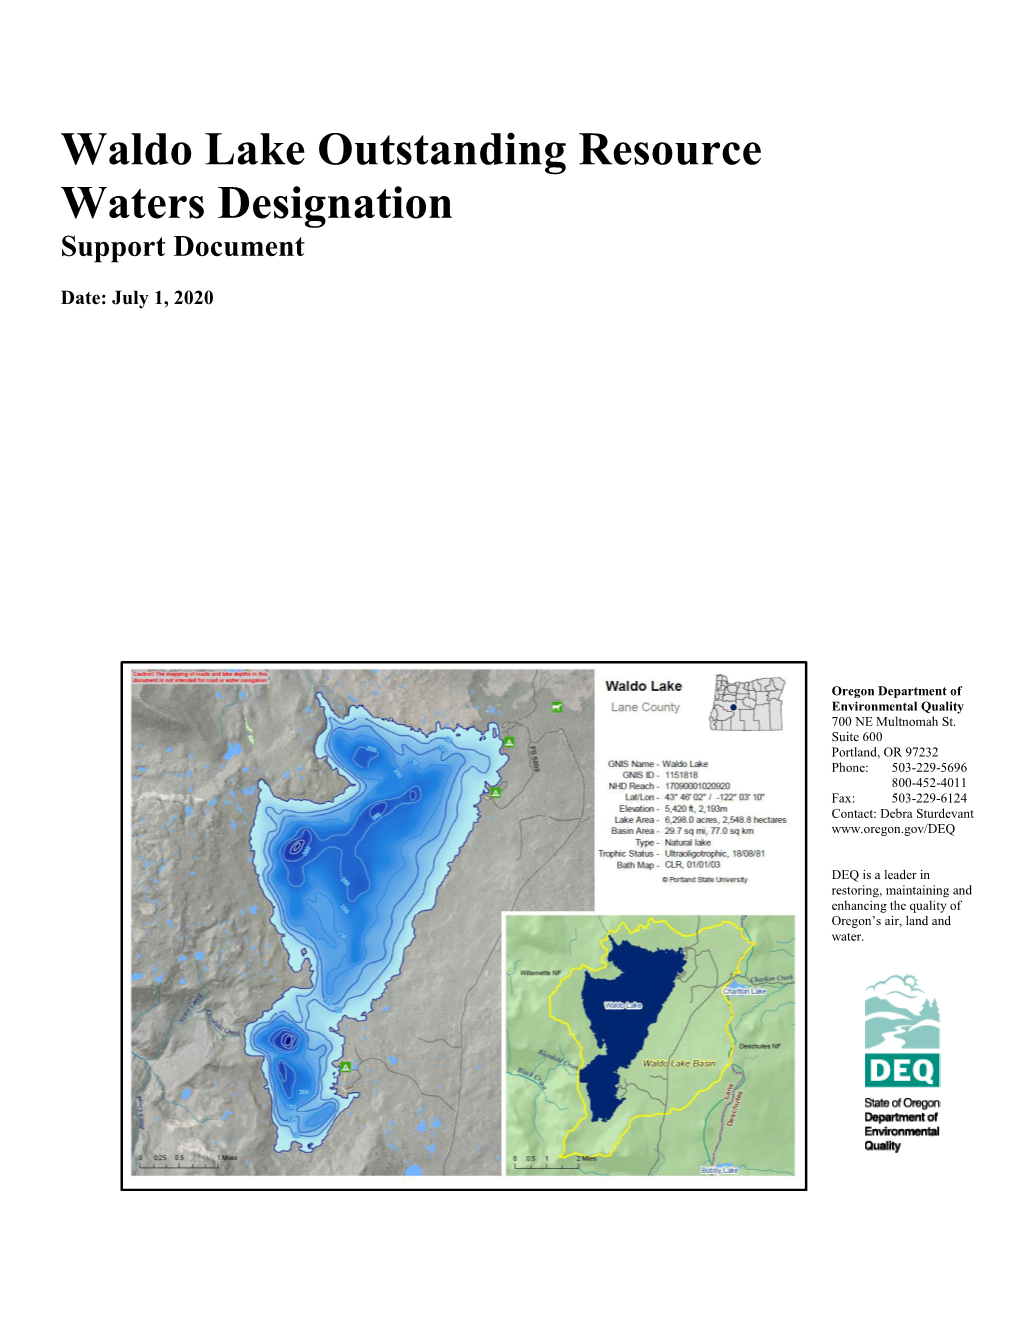 Waldo Lake Outstanding Resource Waters Designation Support Document